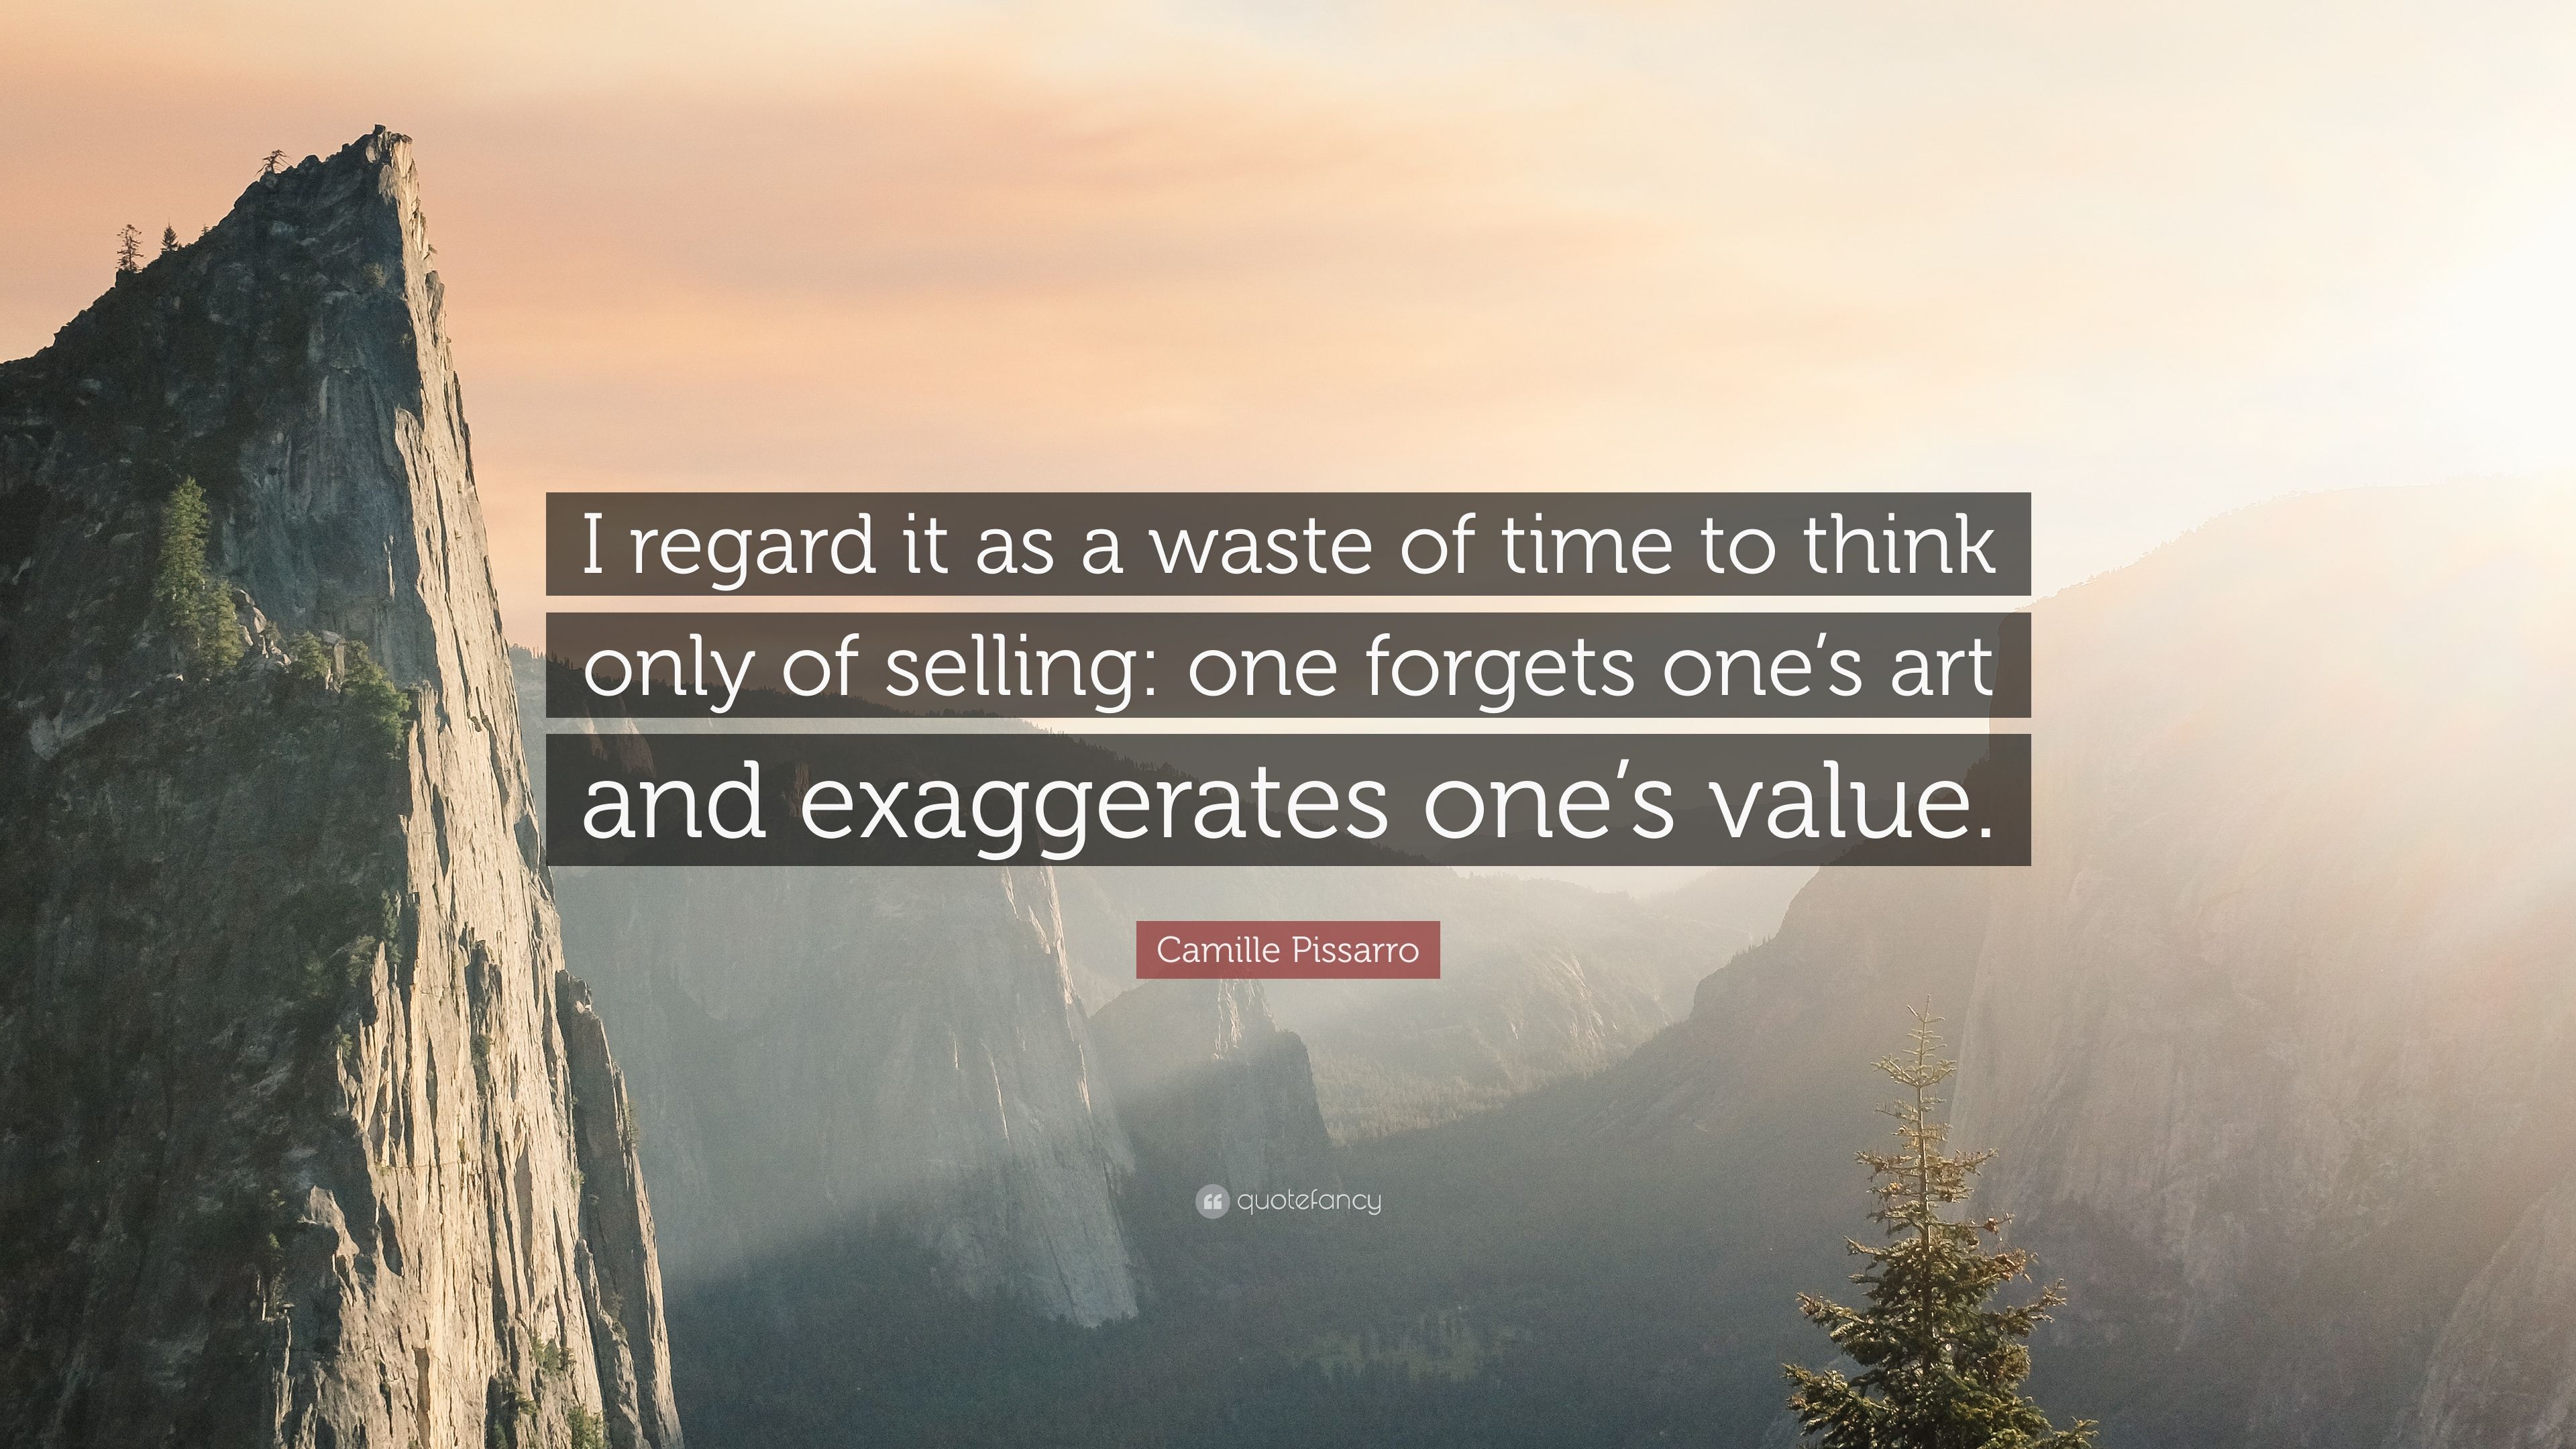 Camille Pissarro Quote: “I regard it as a waste of time to think only of selling: one forgets one's art and exaggerates one's value.” (7 wallpaper)